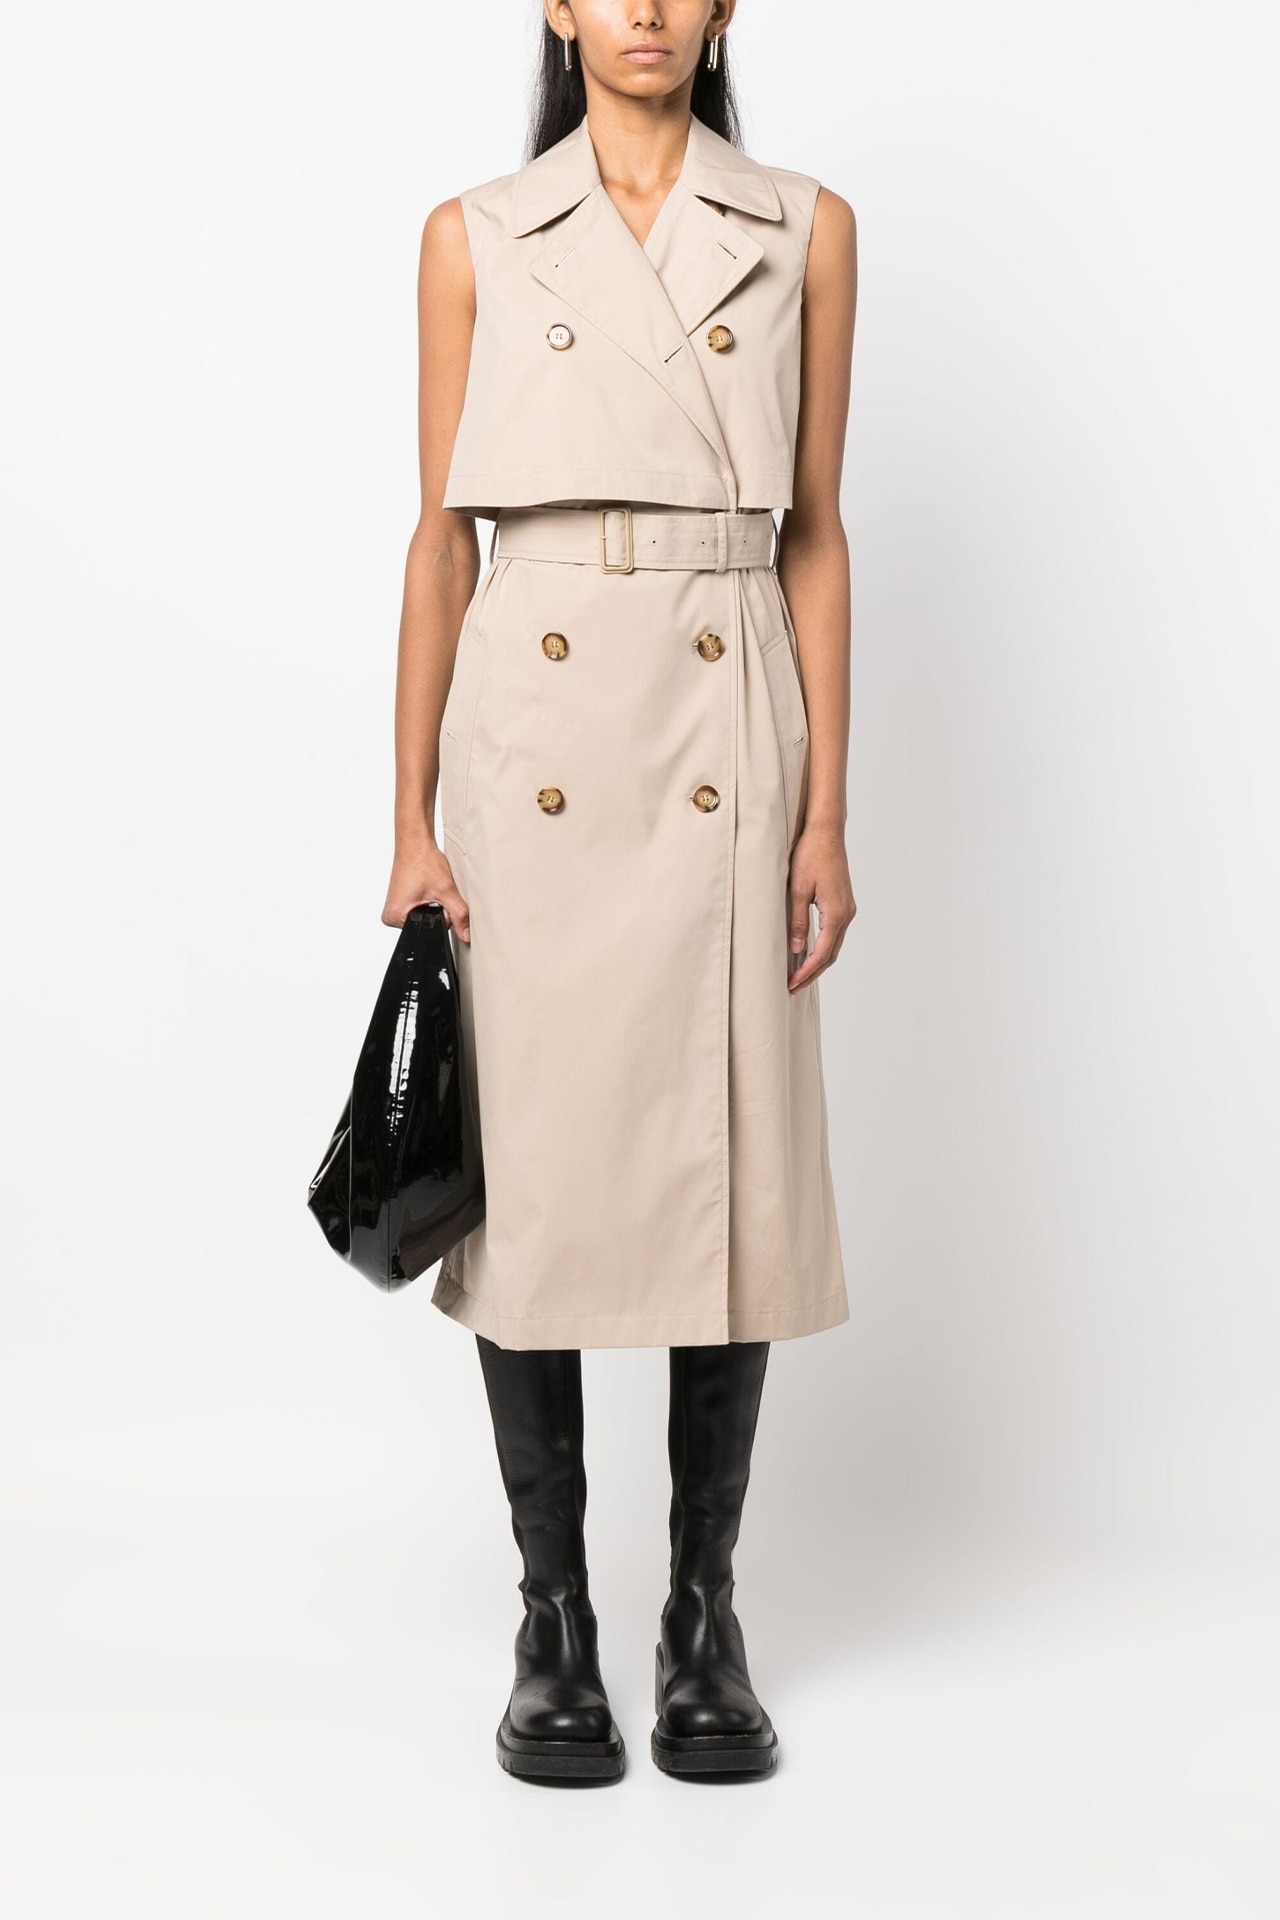 Cape Summers Beige Sleeveless Trench Coat